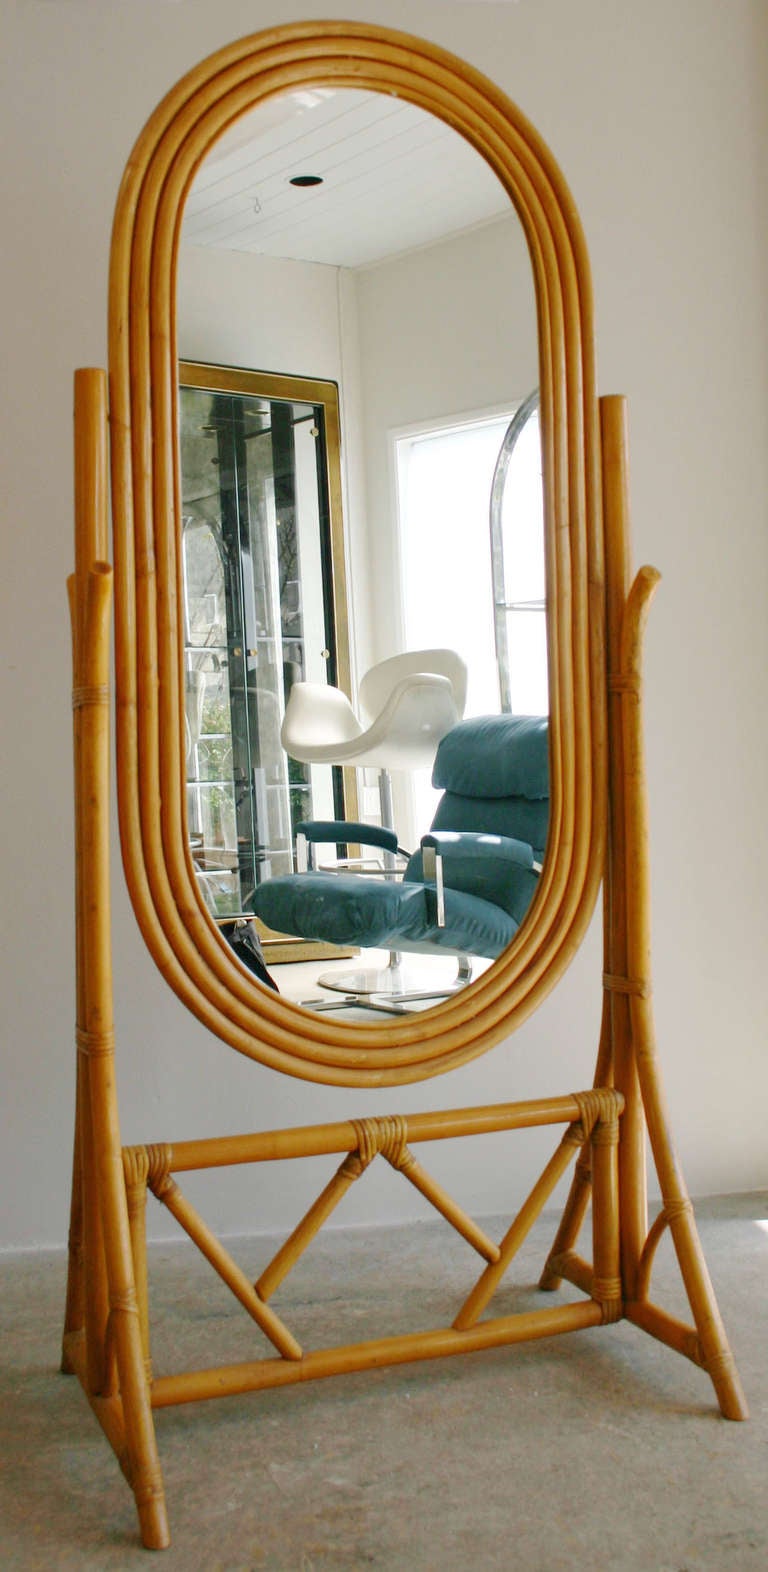 A freestanding, deco-modern, cantilevered, swivel mirror in the manner of Paul Frankl, by Harvey Schwartz of Tropical Sun Rattan.